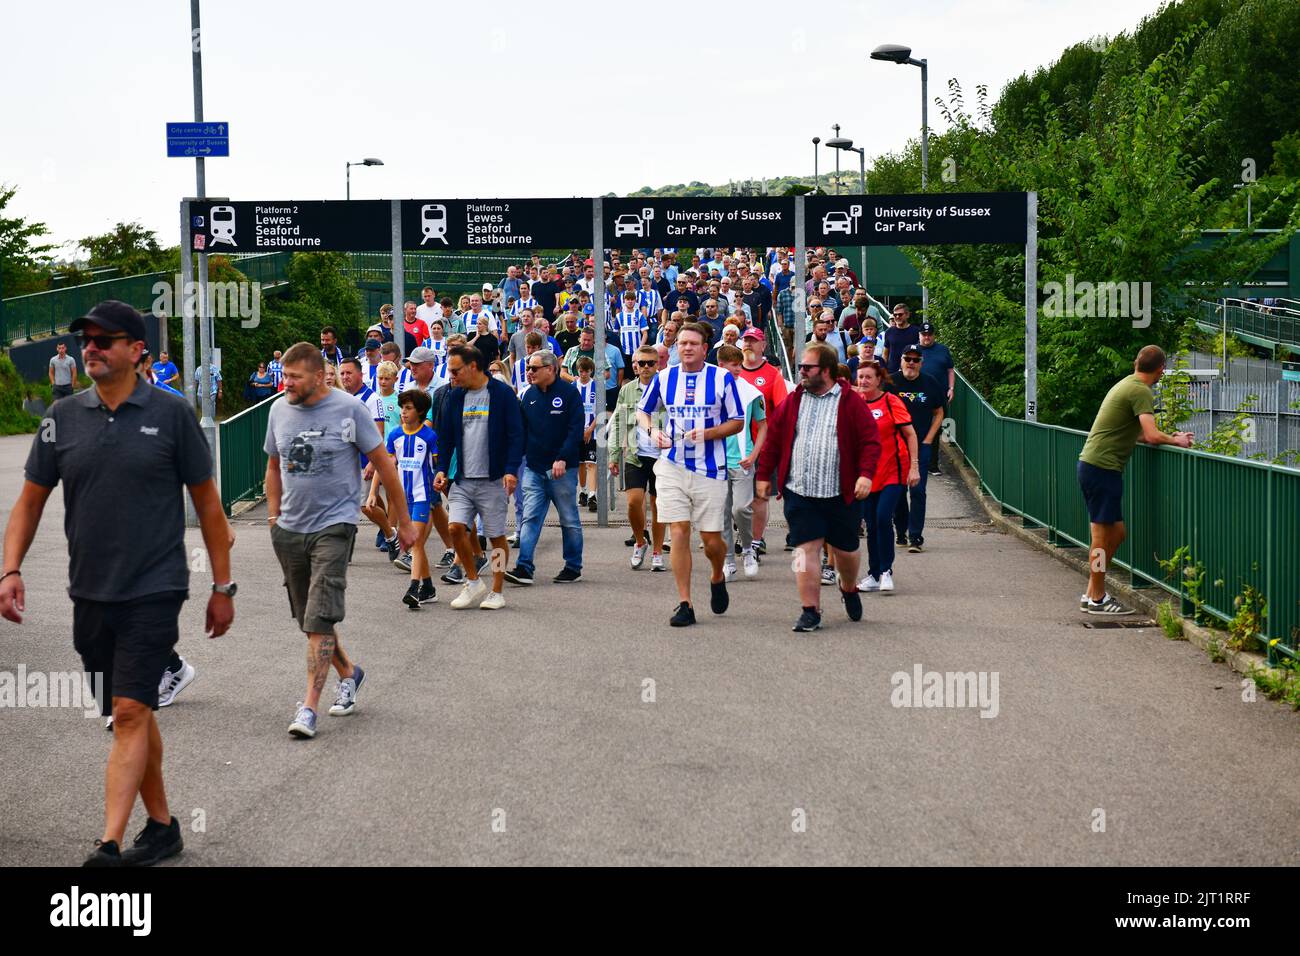 Brighton, UK. 27th Aug, 2022. Fans arrive for the Premier League match between Brighton & Hove Albion and Leeds United at The Amex on August 27th 2022 in Brighton, England. (Photo by Jeff Mood/phcimages.com) Credit: PHC Images/Alamy Live News Stock Photo